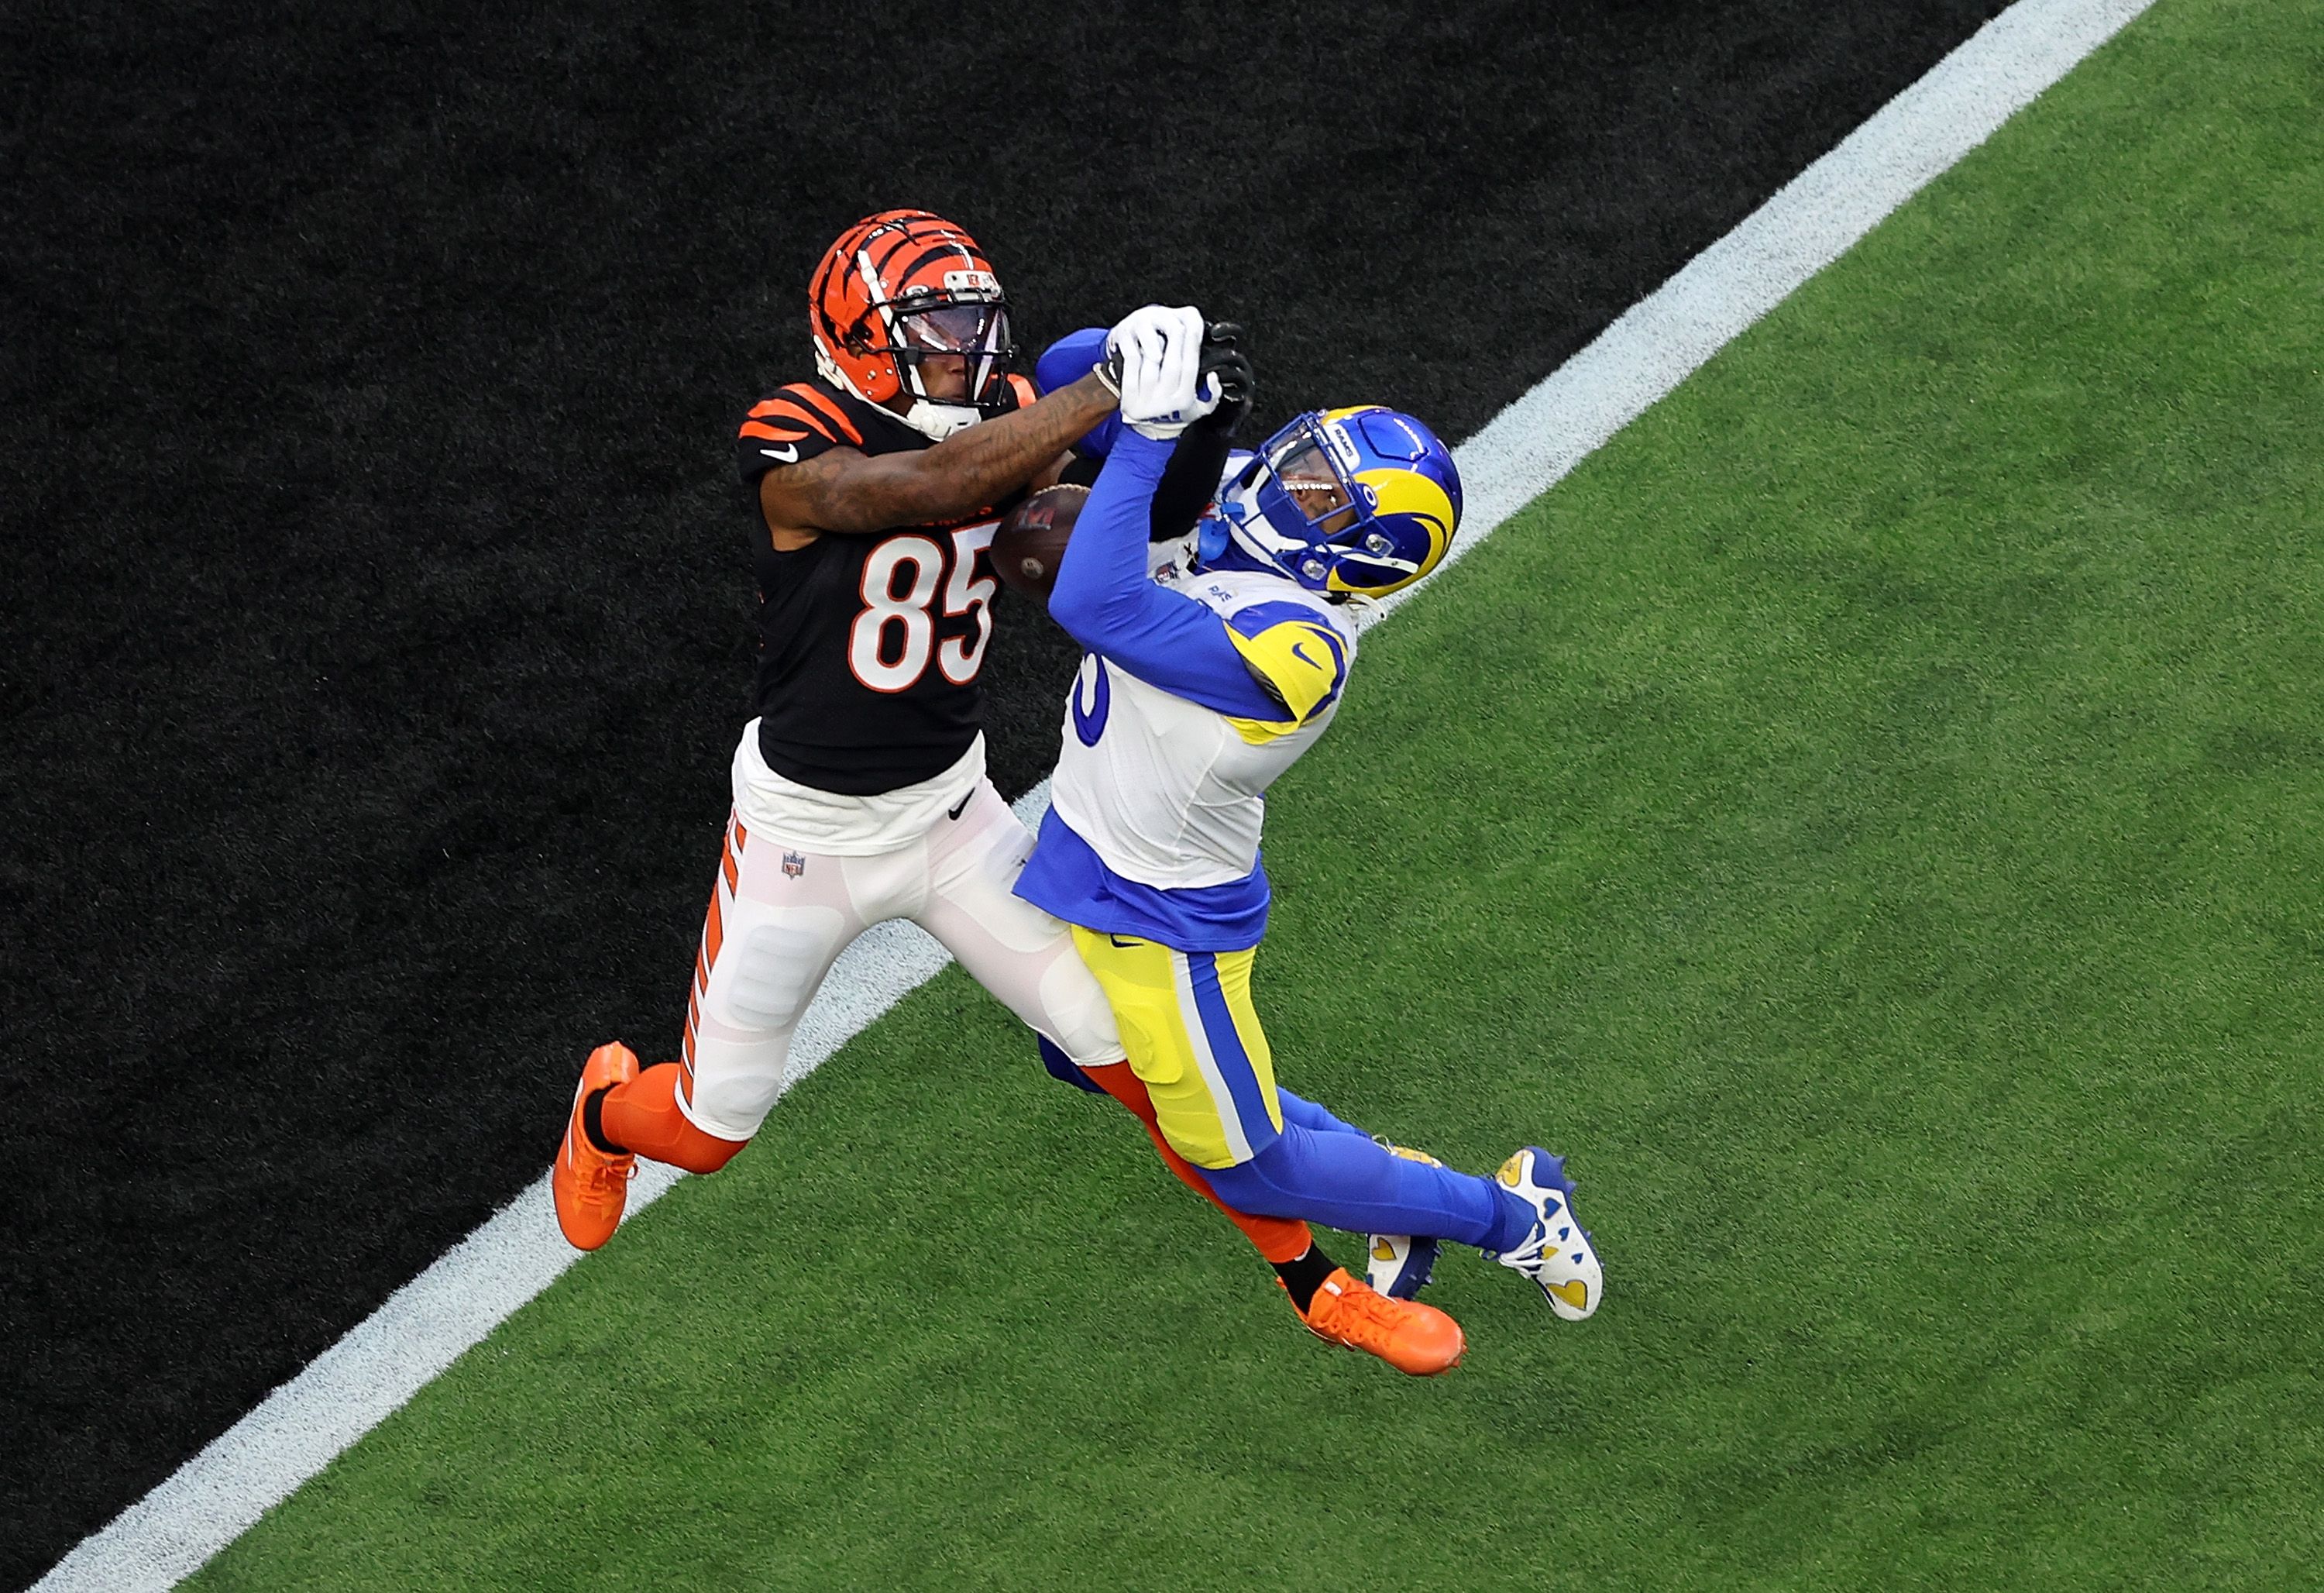 Tee Higgins #85 of the Cincinnati Bengals has a pass broken up by Jalen Ramsey #5 of the Los Angeles Rams during Super Bowl LVI at SoFi Stadium on February 13, 2022 in Inglewood, California